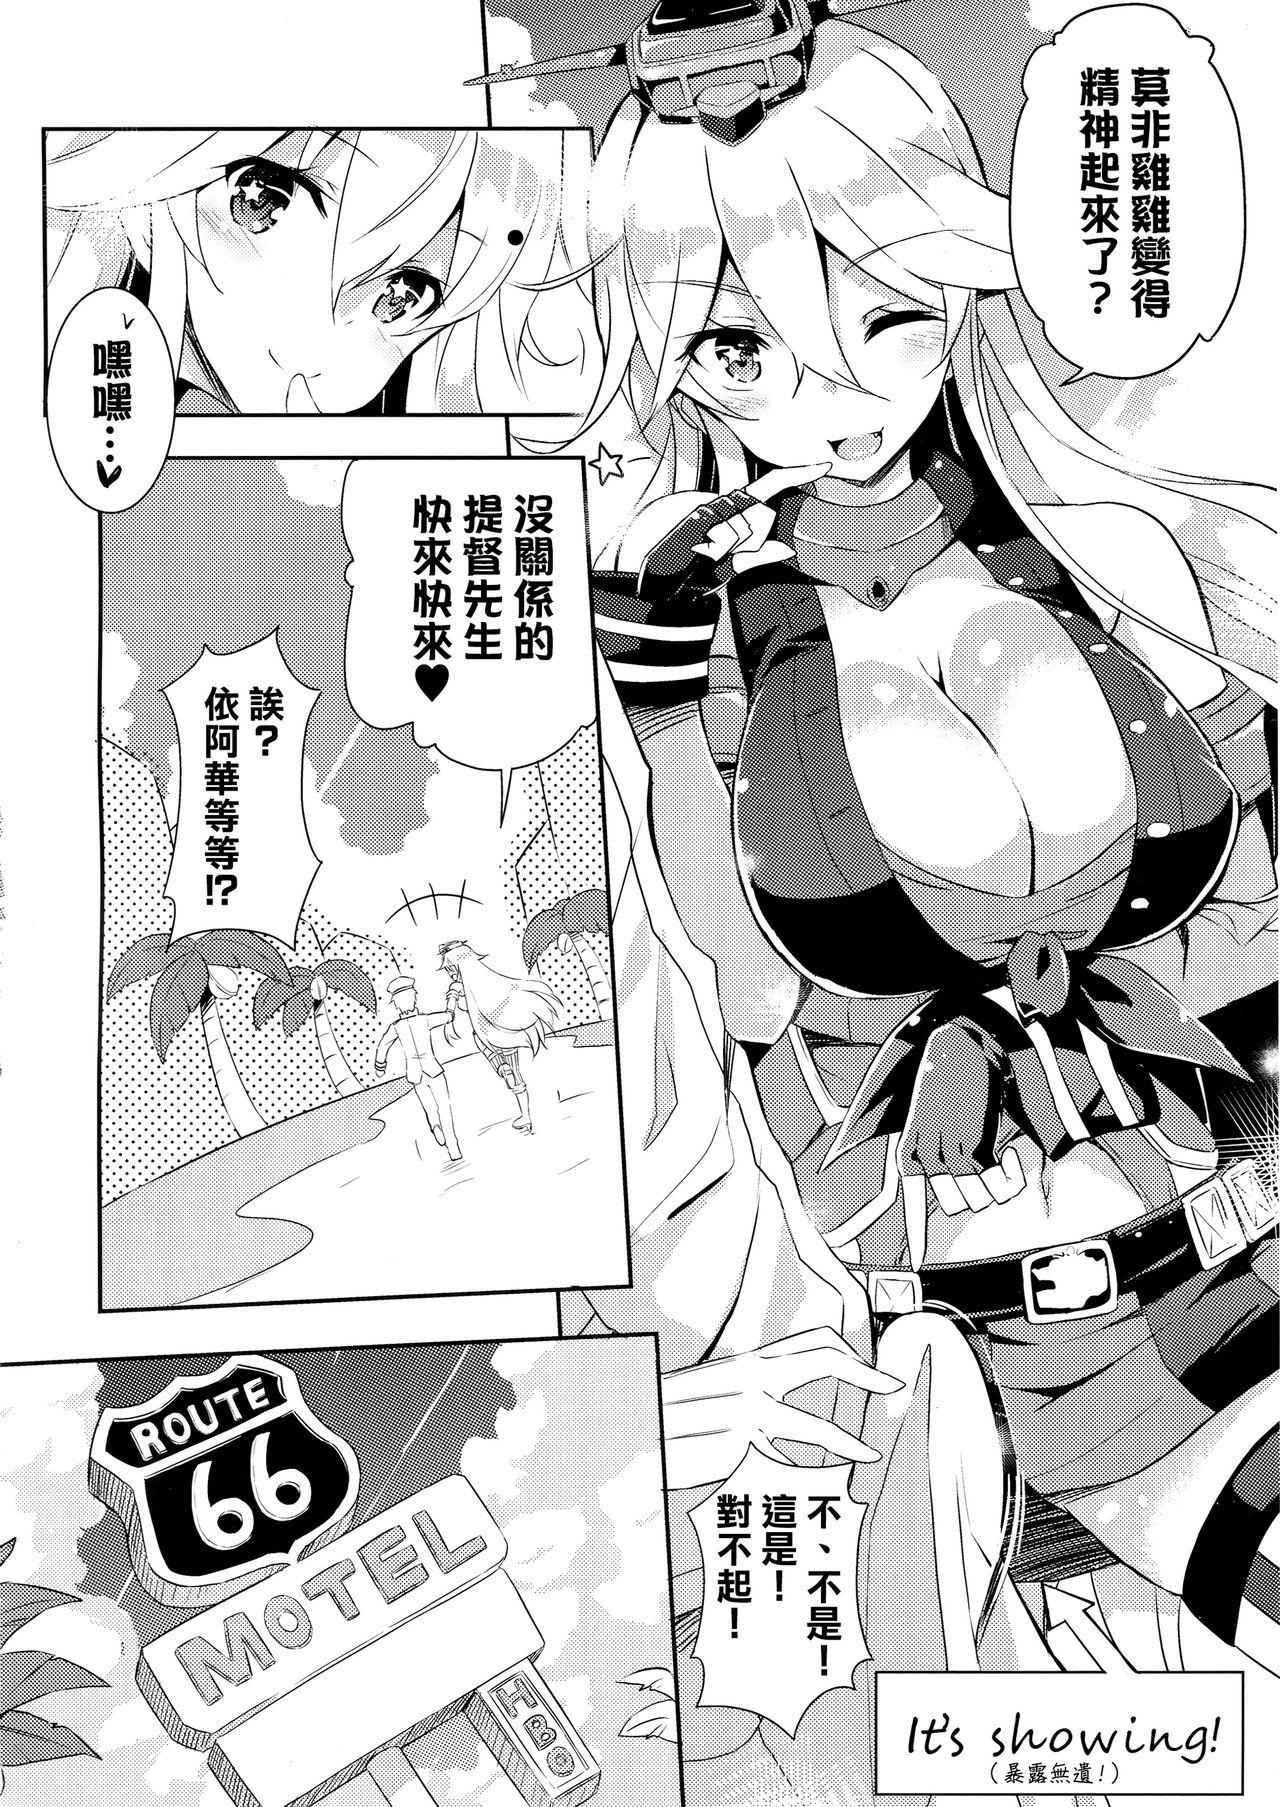 Busty CUTE GIRL! THE AMERICAN! - Kantai collection Pene - Page 8